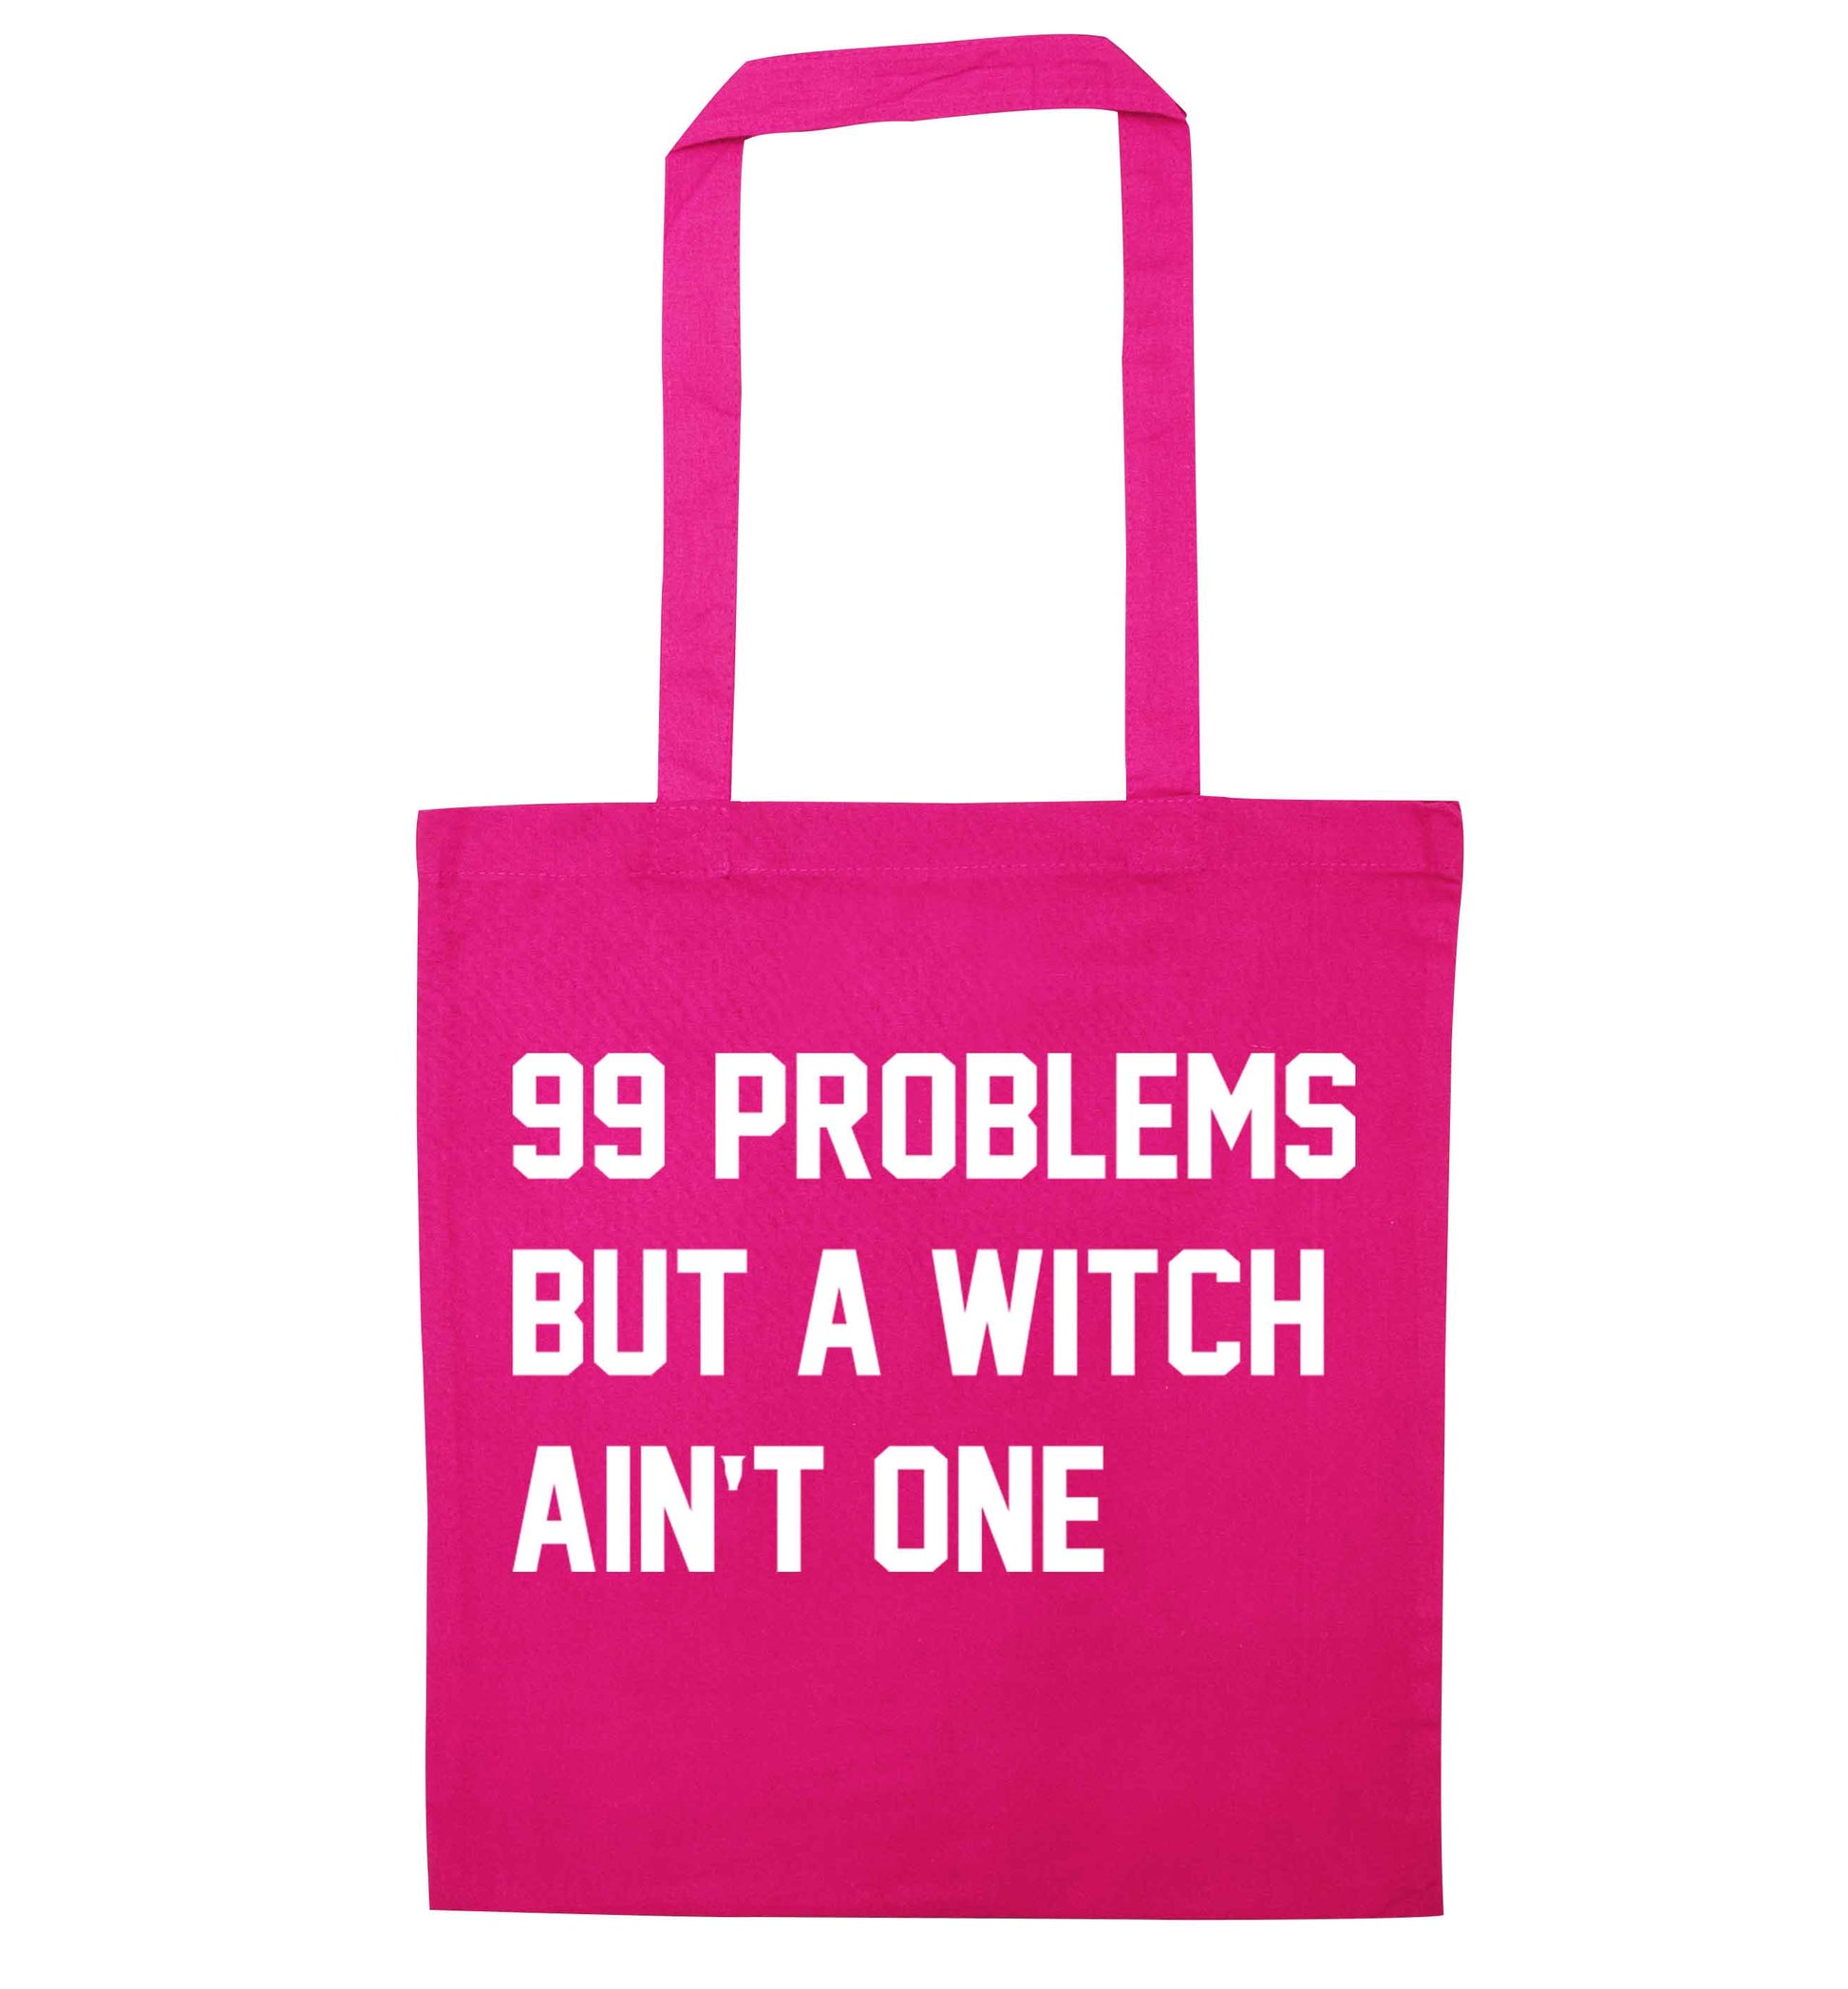 99 Problems but a witch aint one pink tote bag